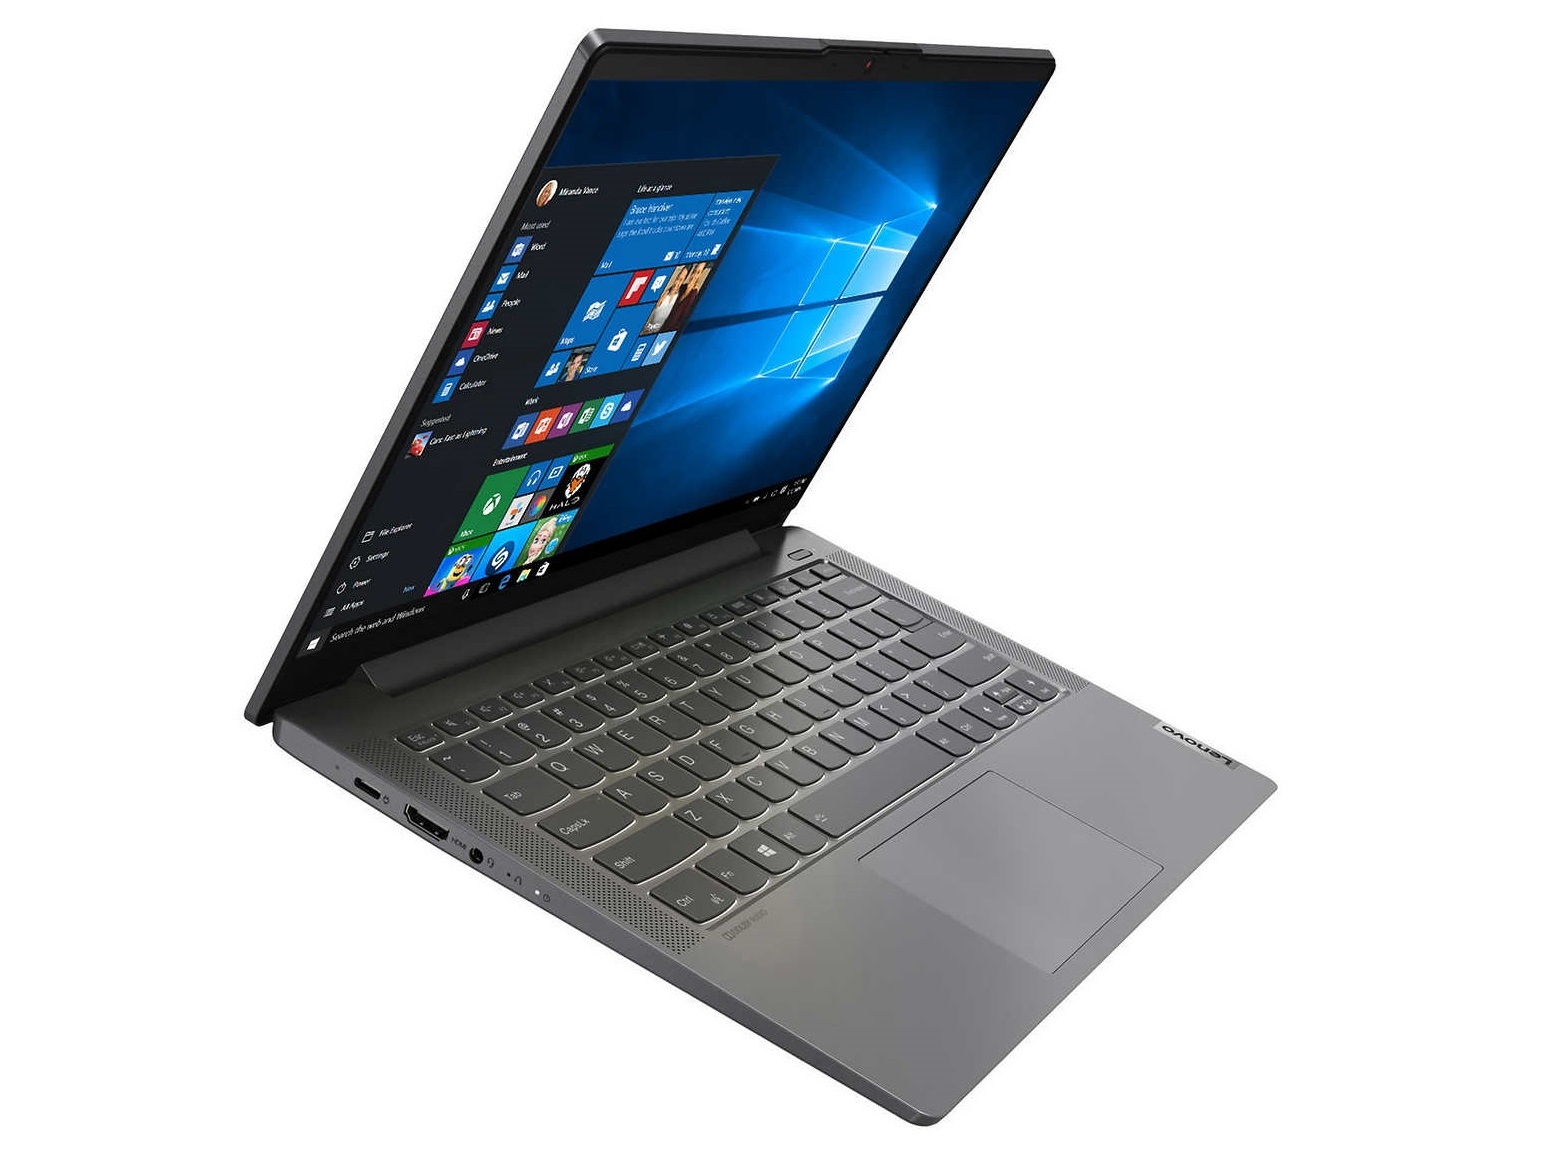 One of our favorite budget Ultrabooks, the Lenovo IdeaPad 5 14, is 